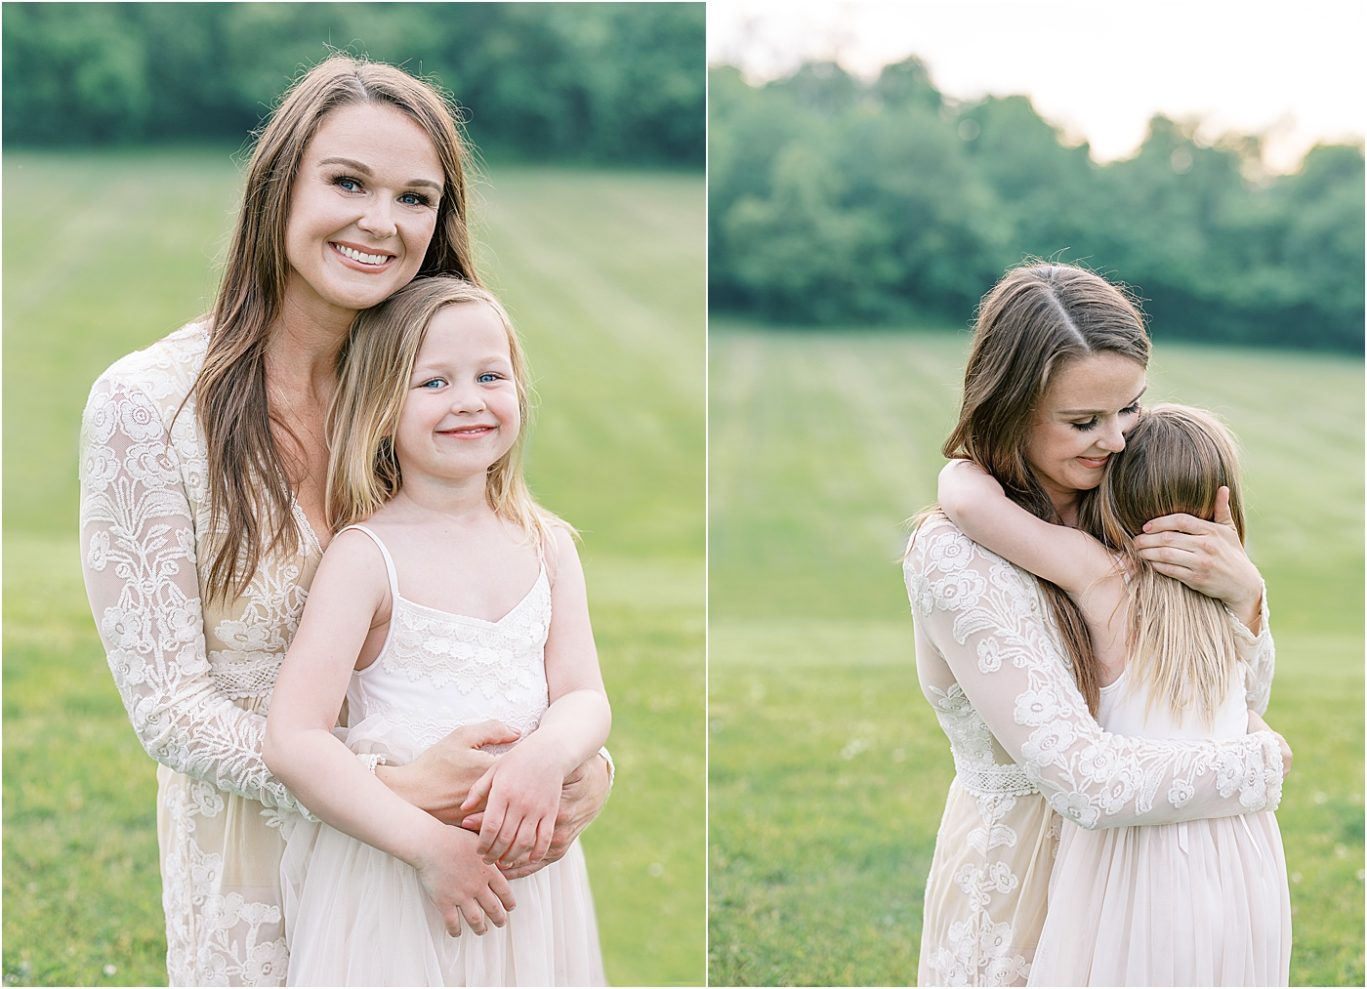 Mom hugging her daughter. Photo by Carmel Family Photographer, Lindsay Konopa Photography.